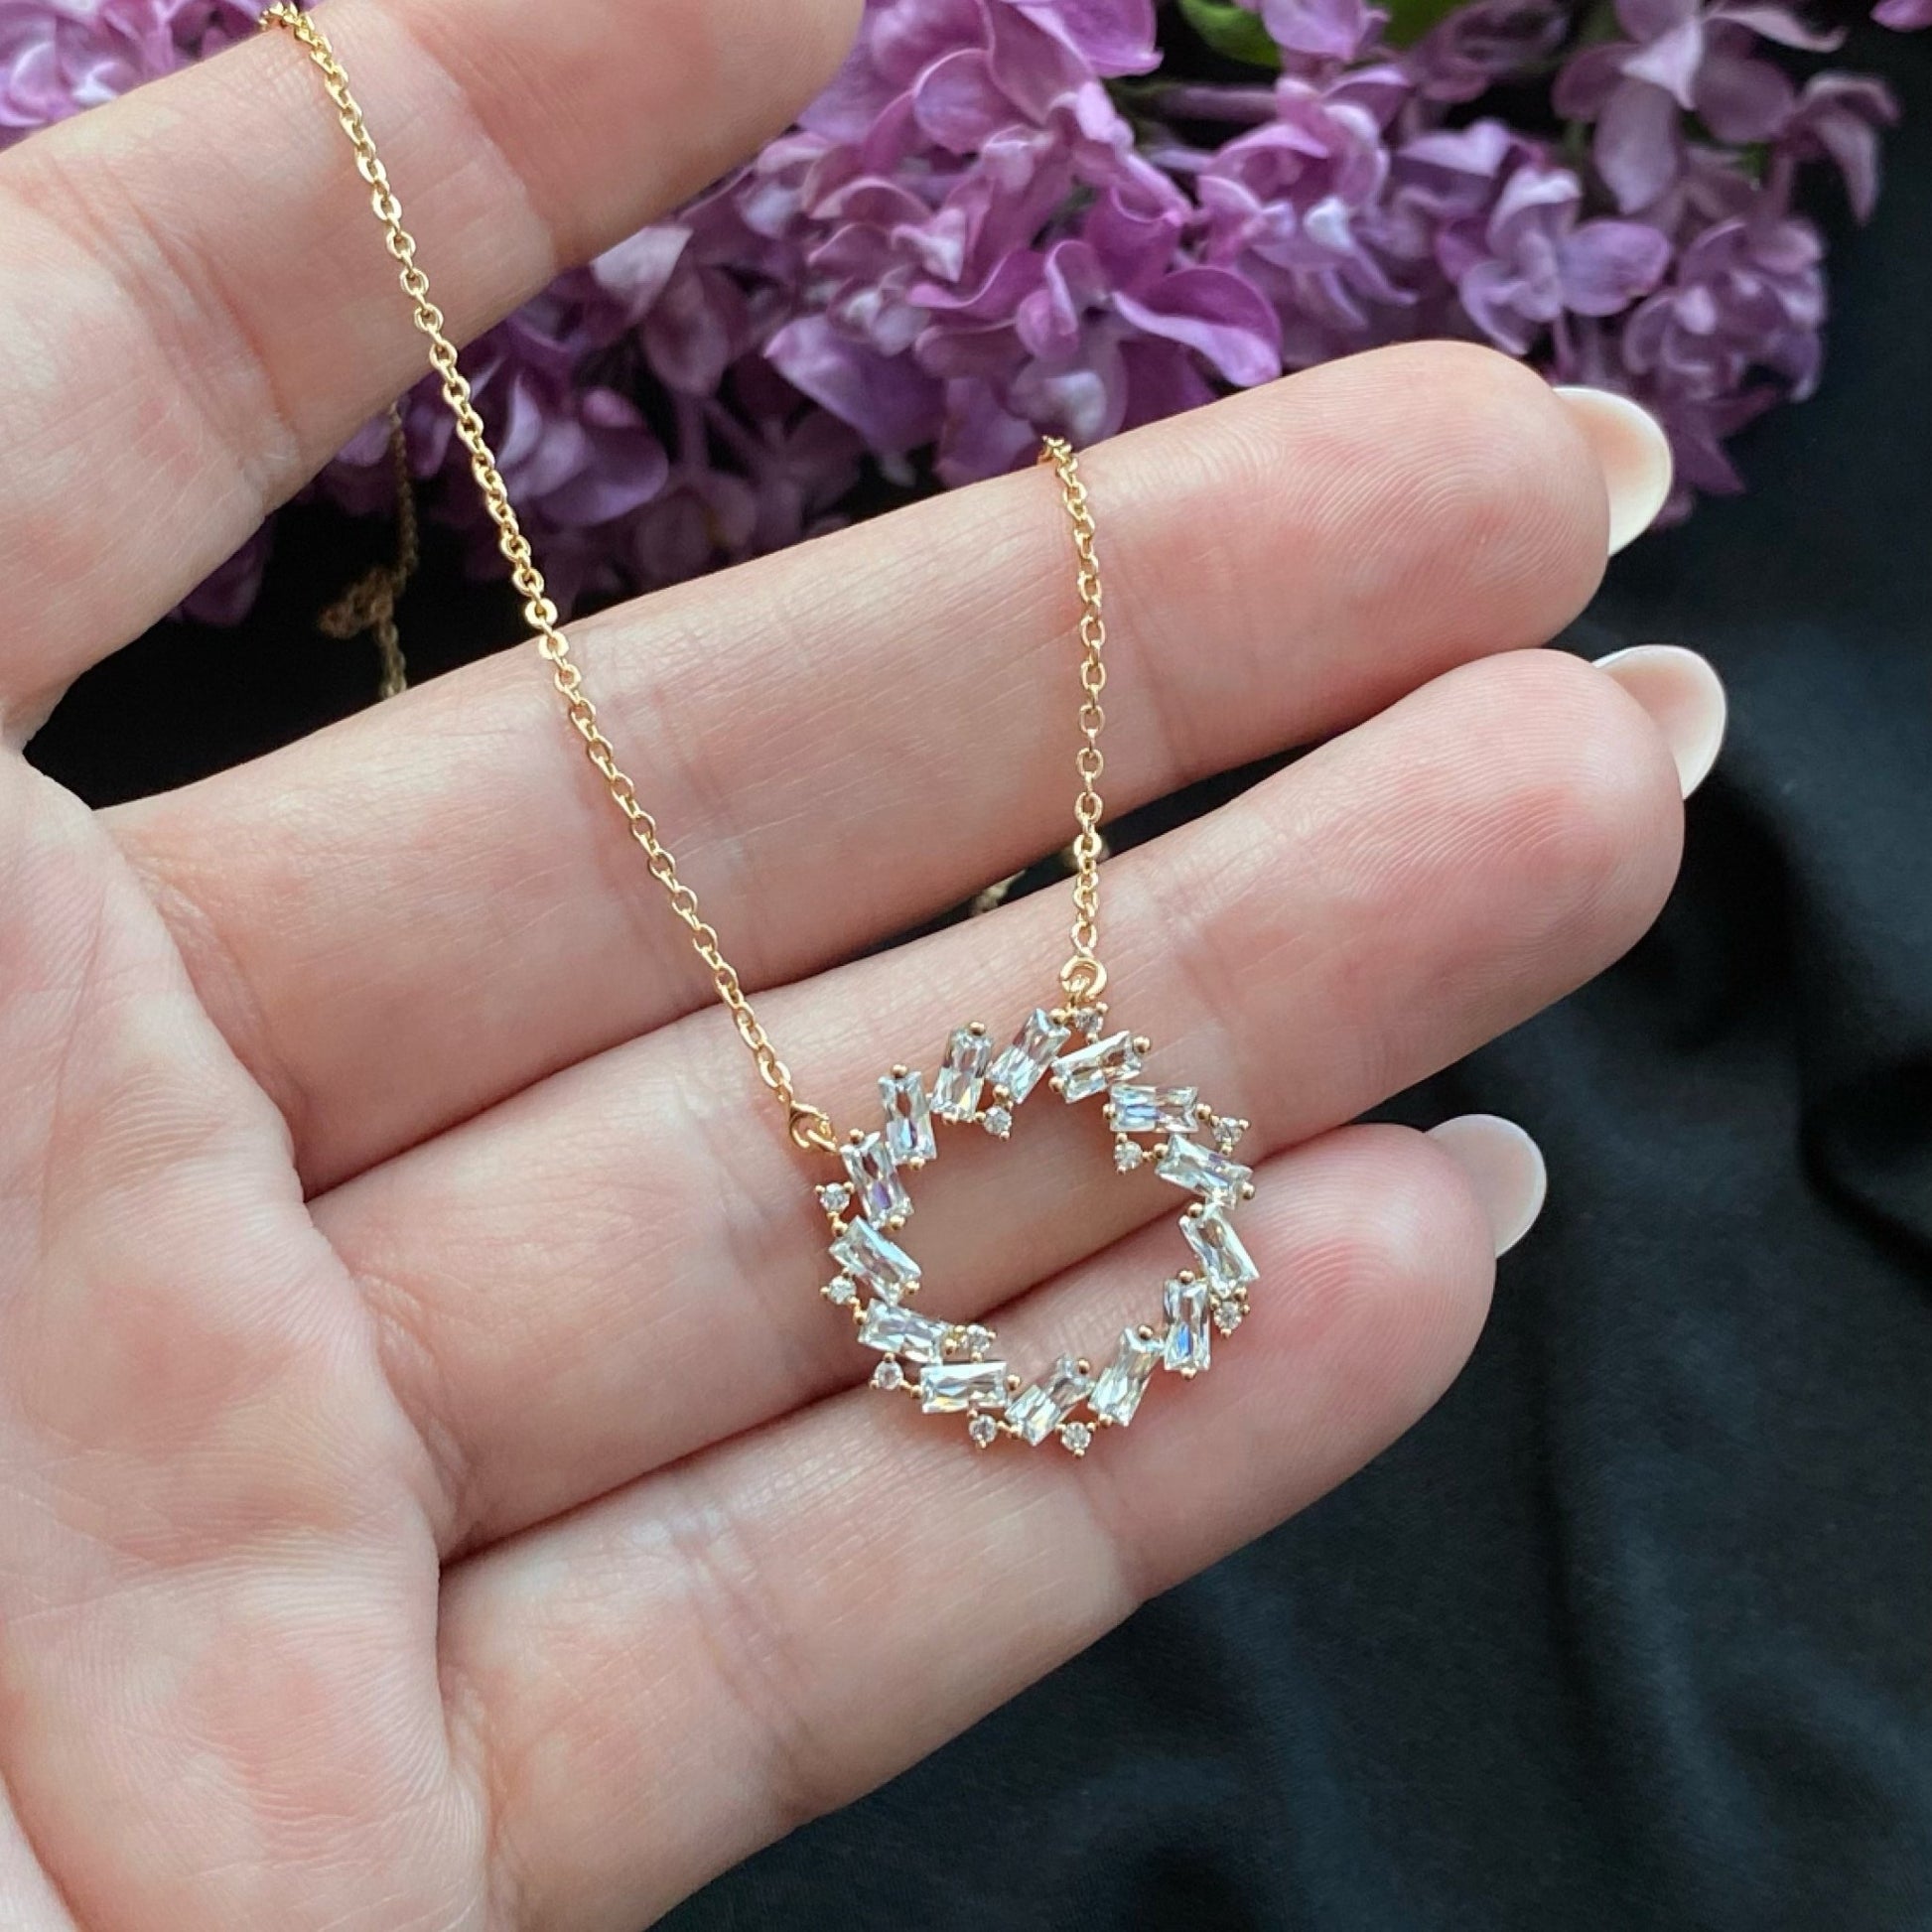 GOLD PLATED CIRCLE PENDANT NECKLACE -